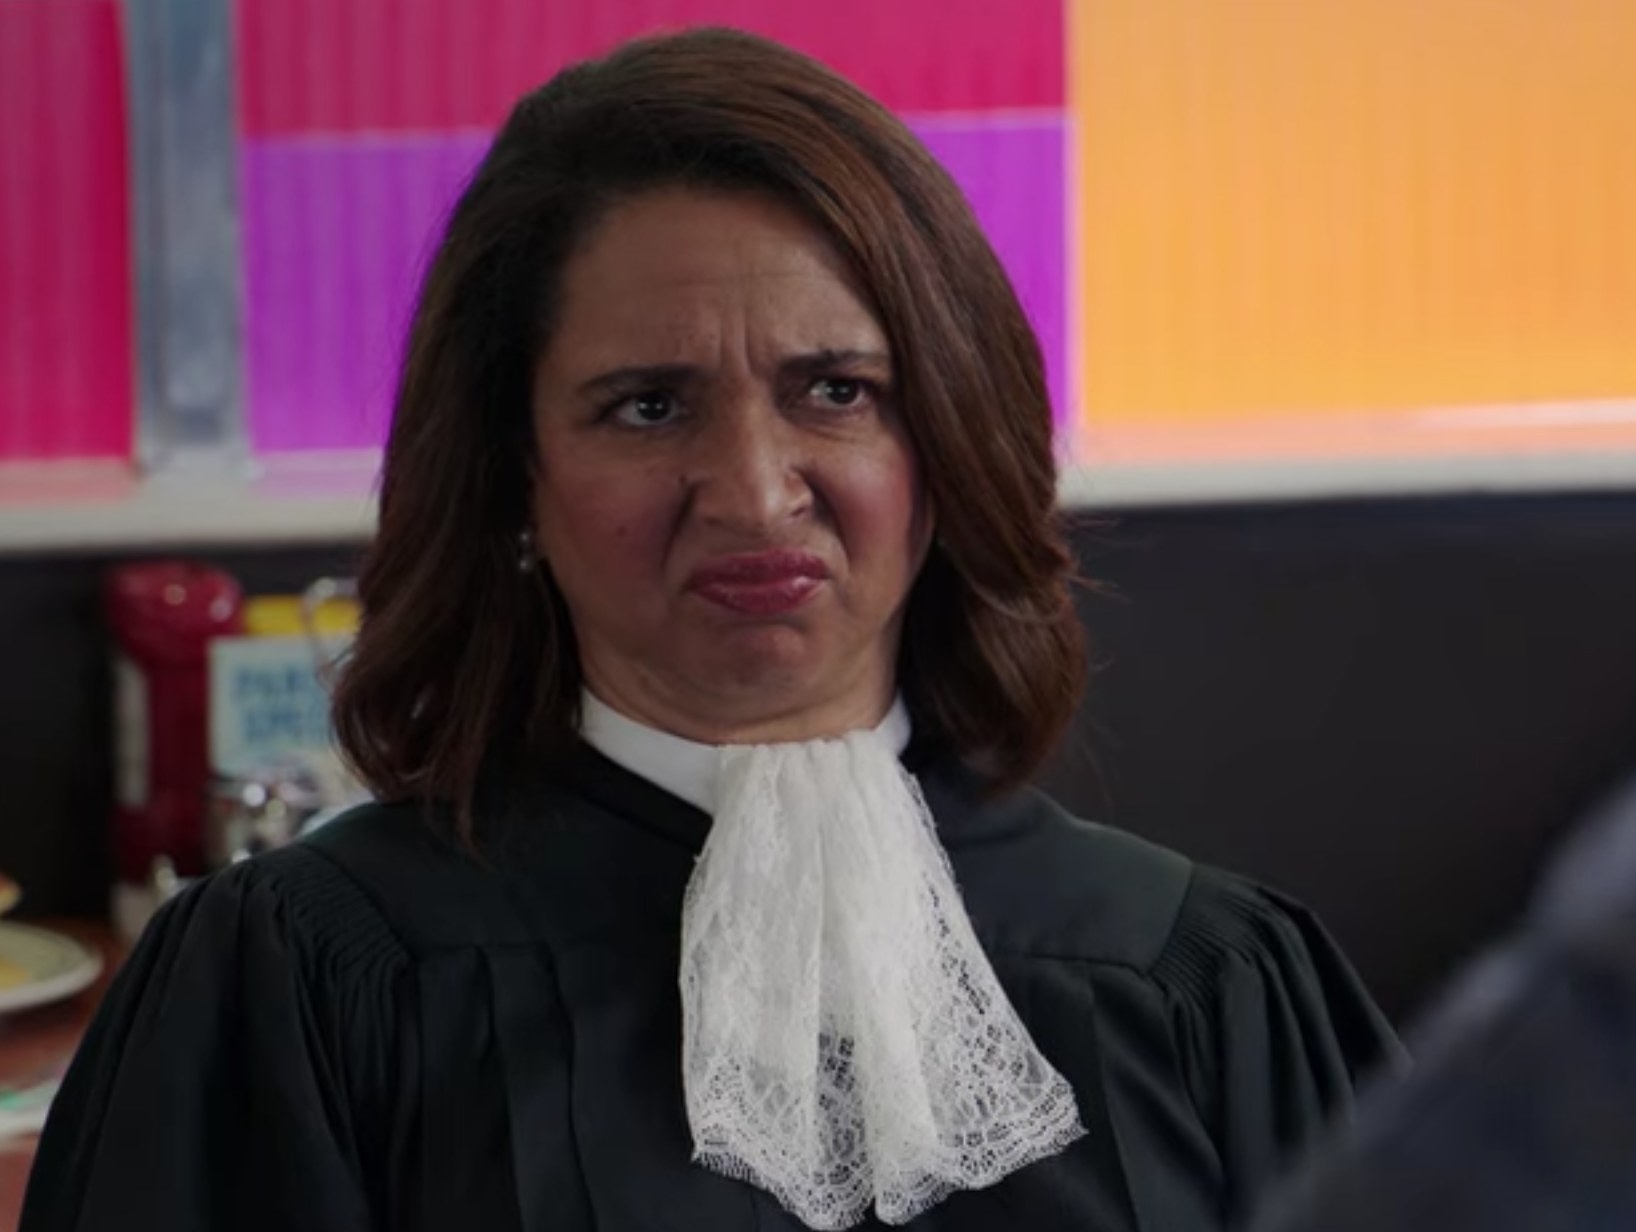 Maya Rudolph as Gen in the good place